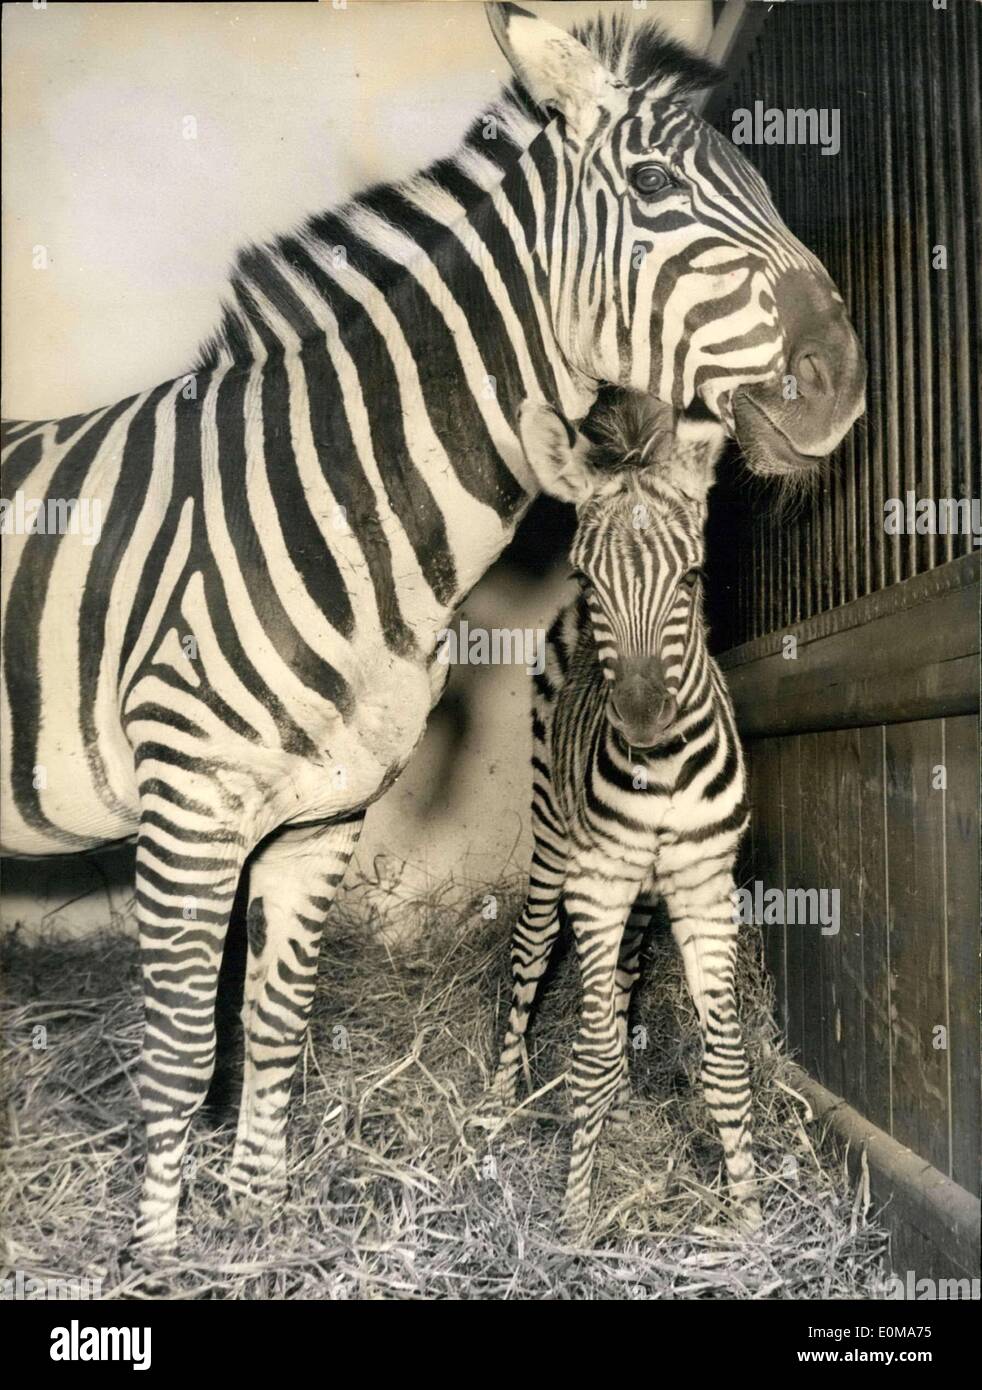 Mar. 27, 1954 - yesterday born: was the little zebra-baby in the zoo of hamburg - stellingen. with its big brown eyes it is looking eagerly around. by the way, zebras' ''new look'' are stripes - like before. Stock Photo